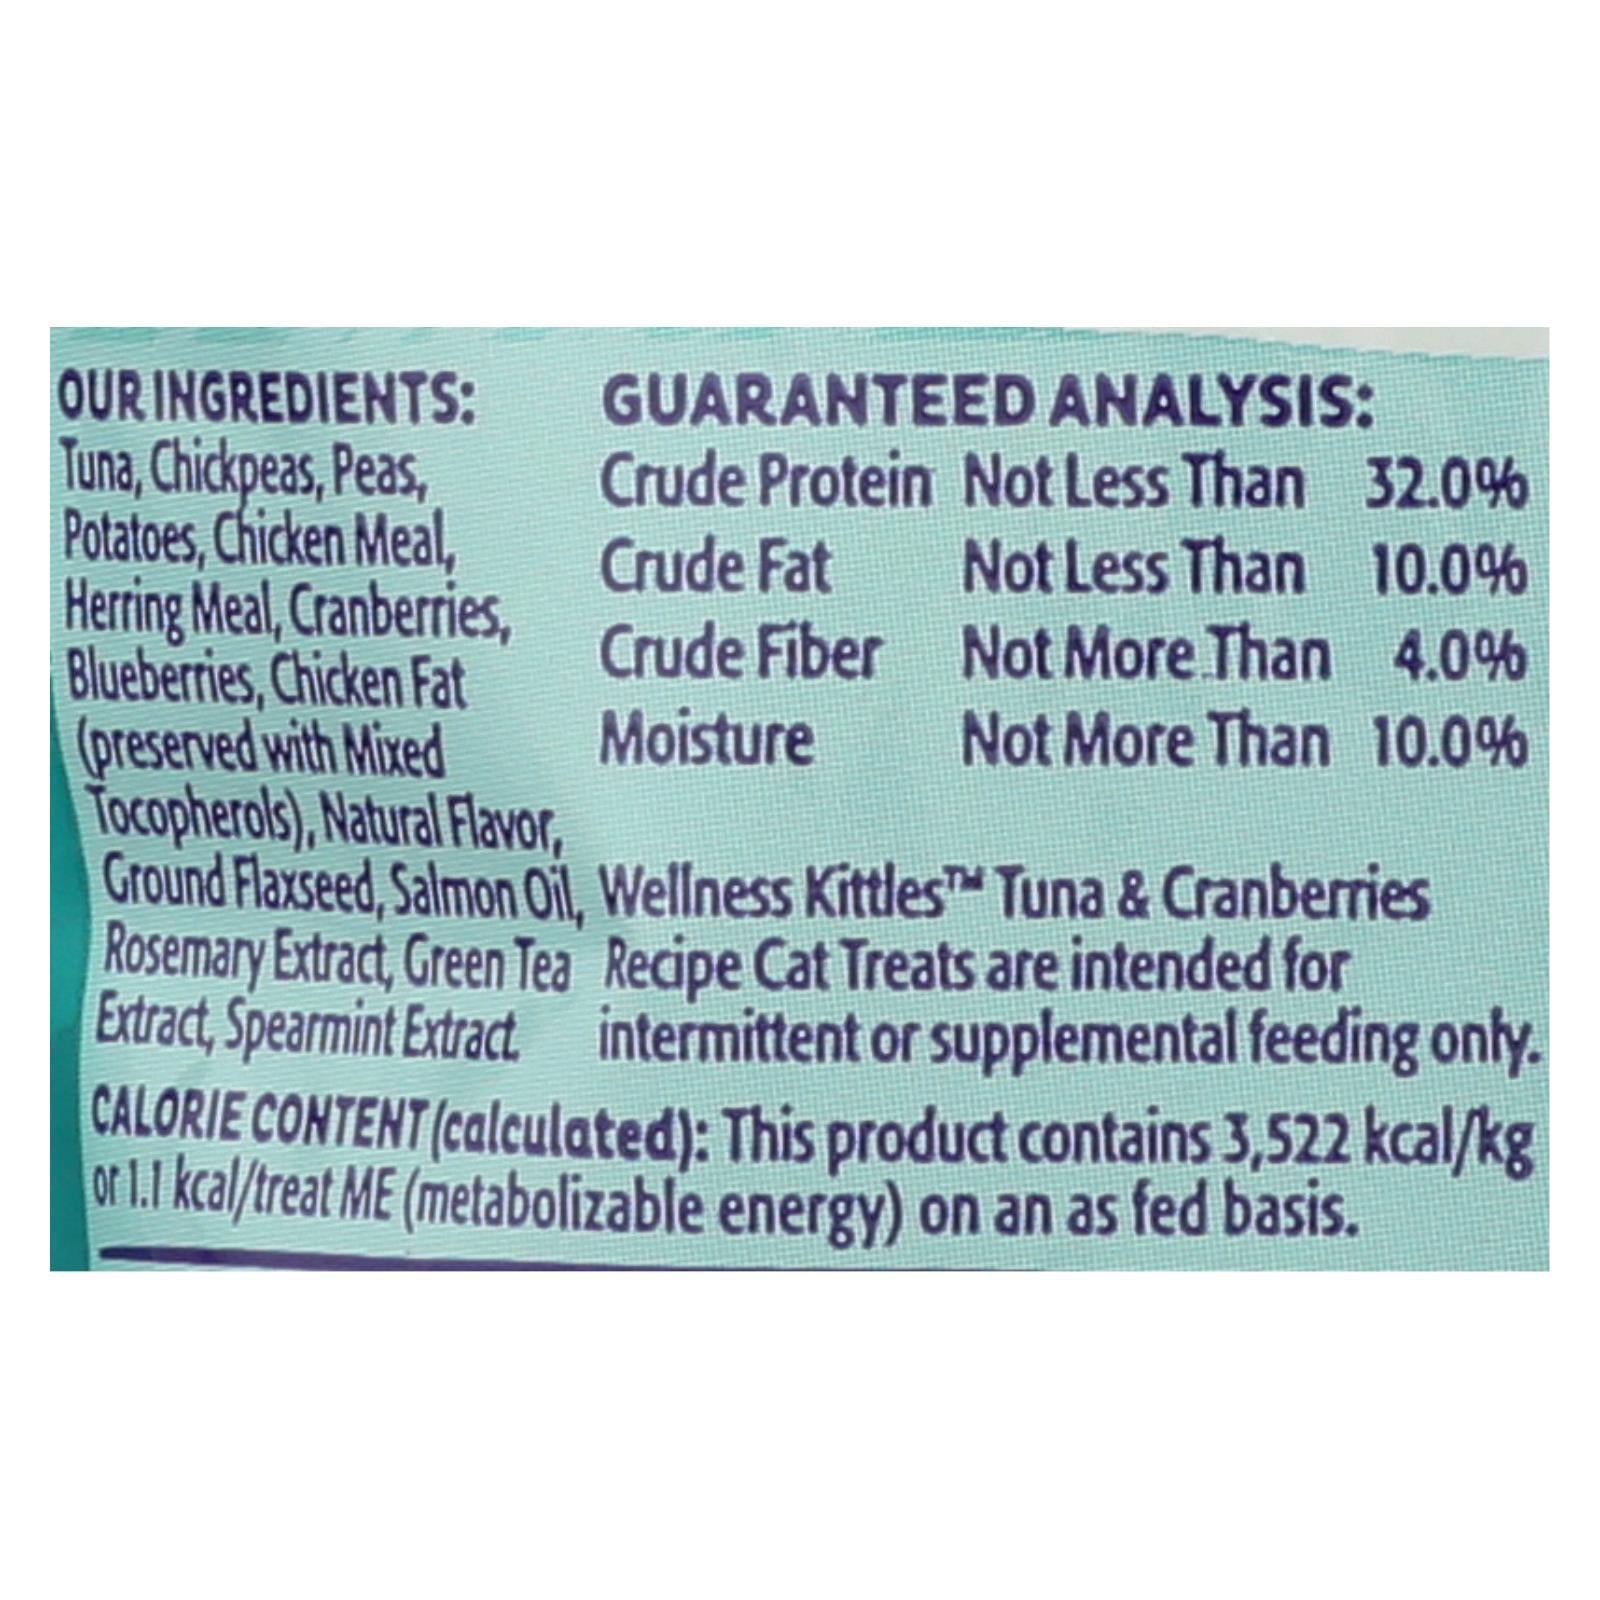 Wellness Pet Products Cat Treat - Kittles - Tuna & Cranberry - Case Of 14 - 2 Oz